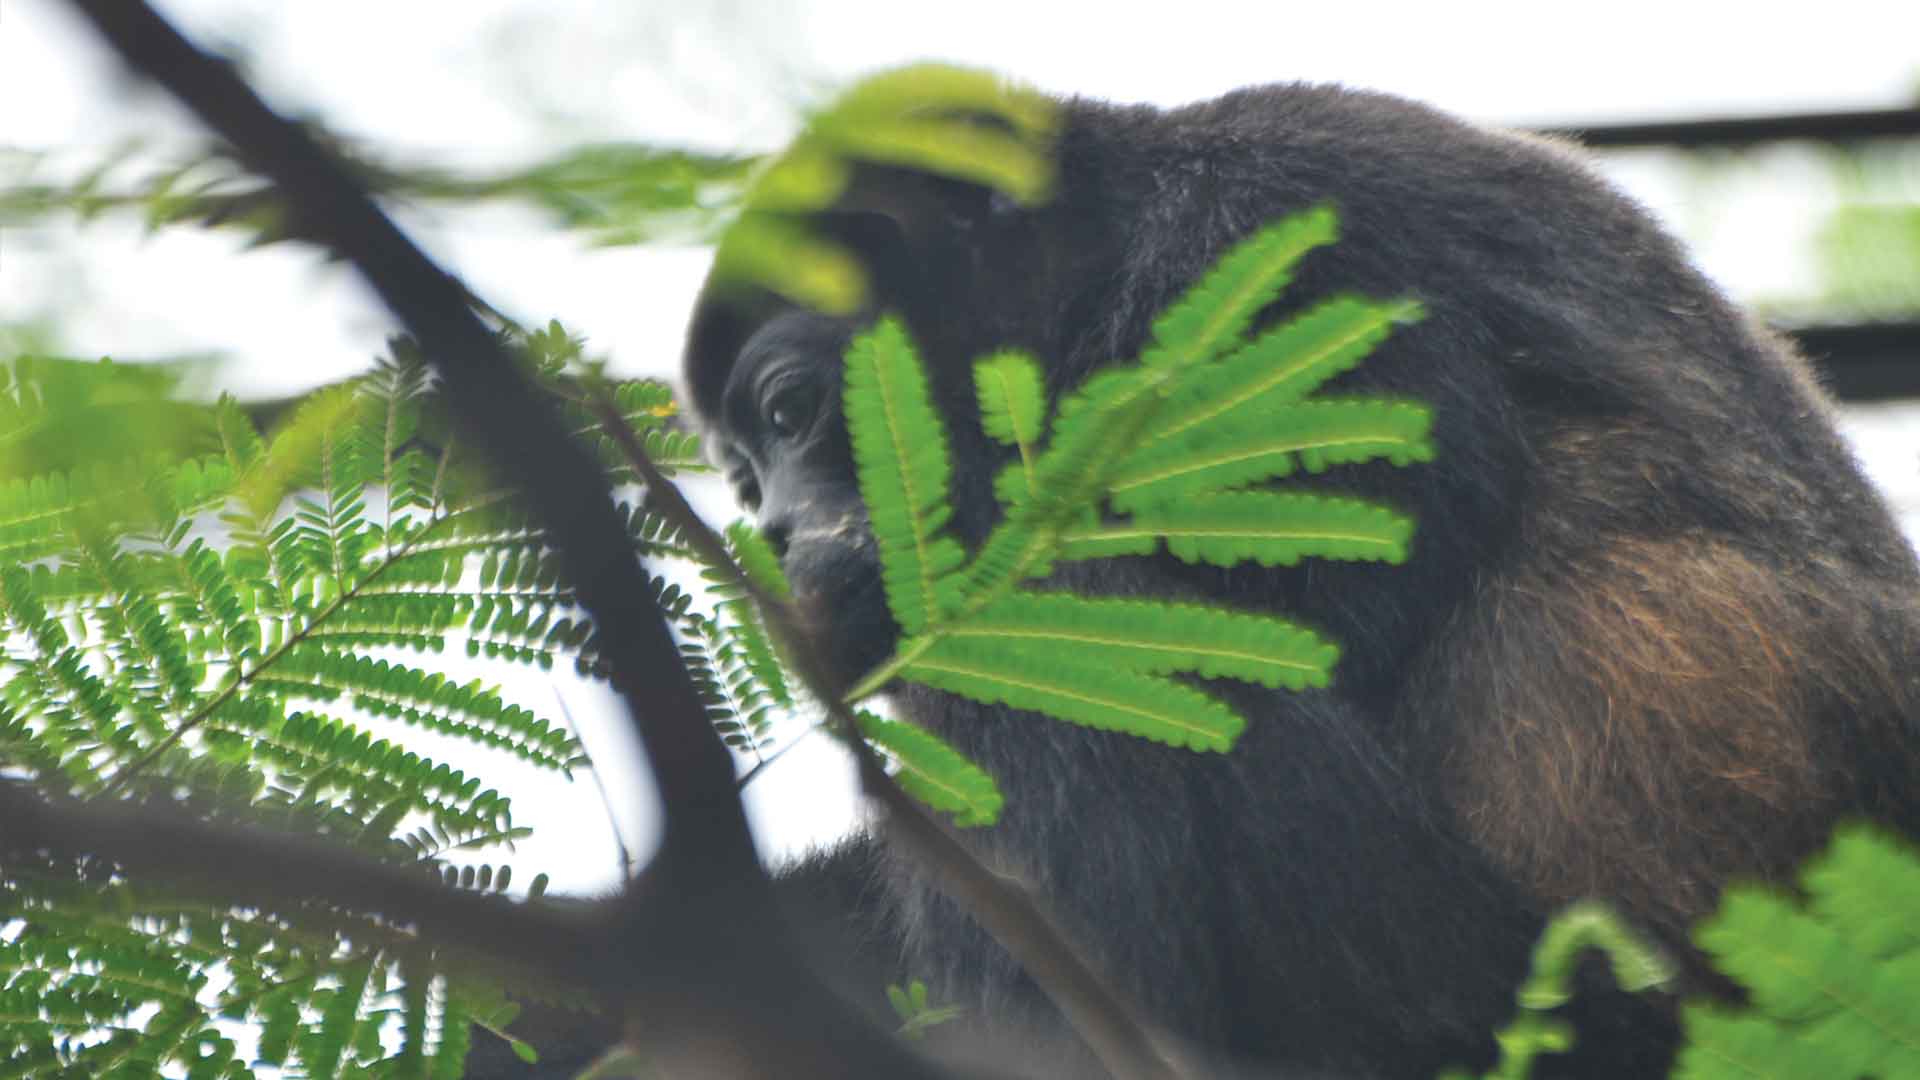 Howler monkey looking down in a tree shrouded by ferns